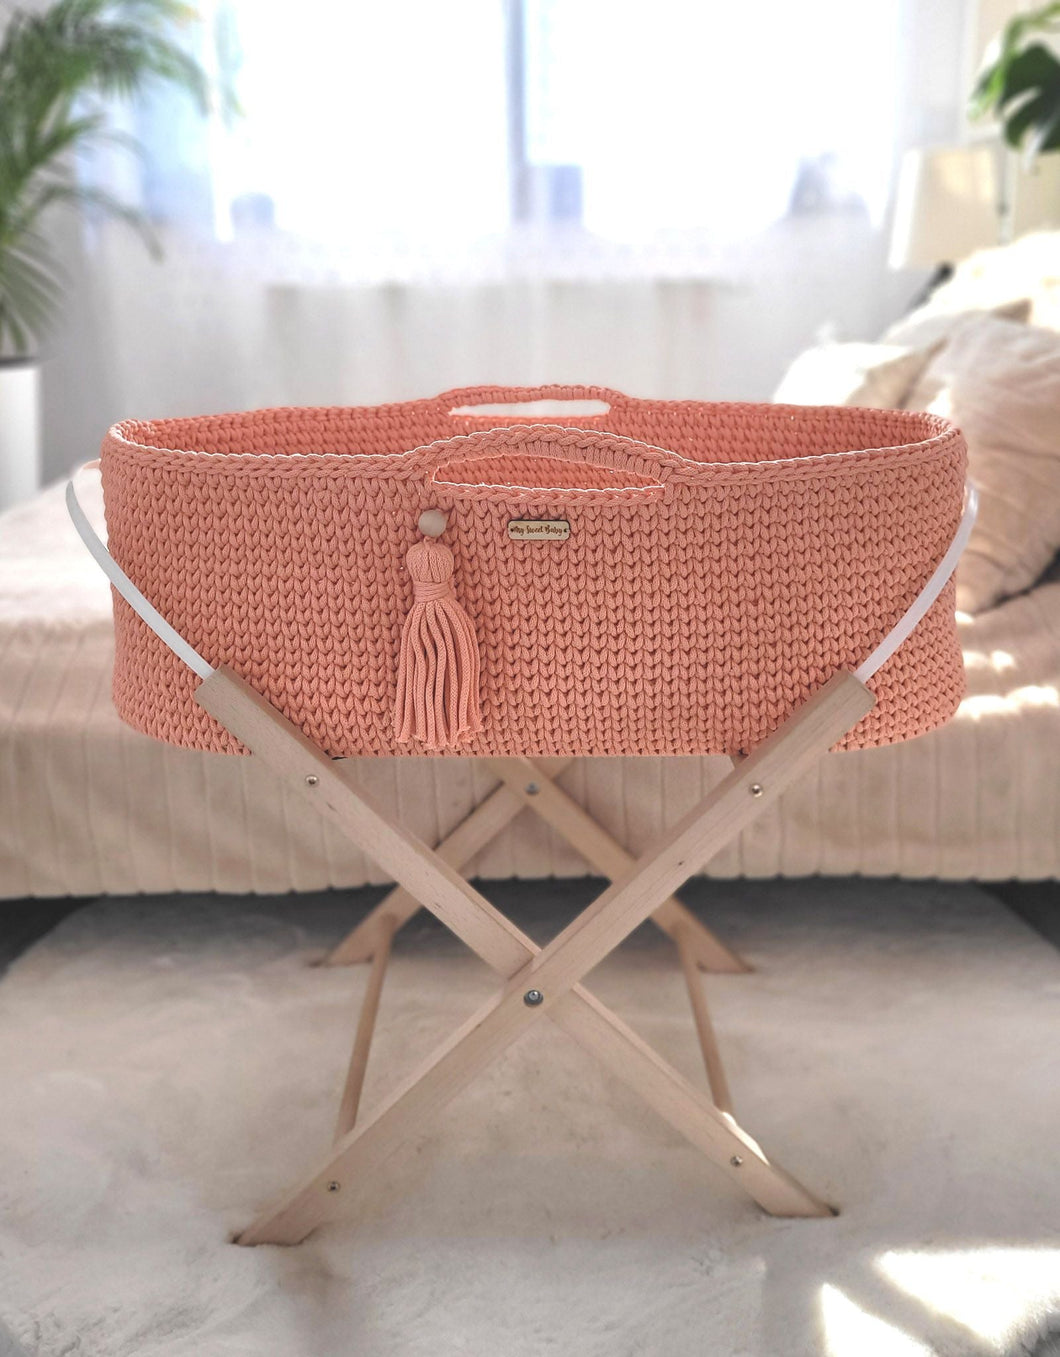 Salmon Crochet Moses Basket without stand